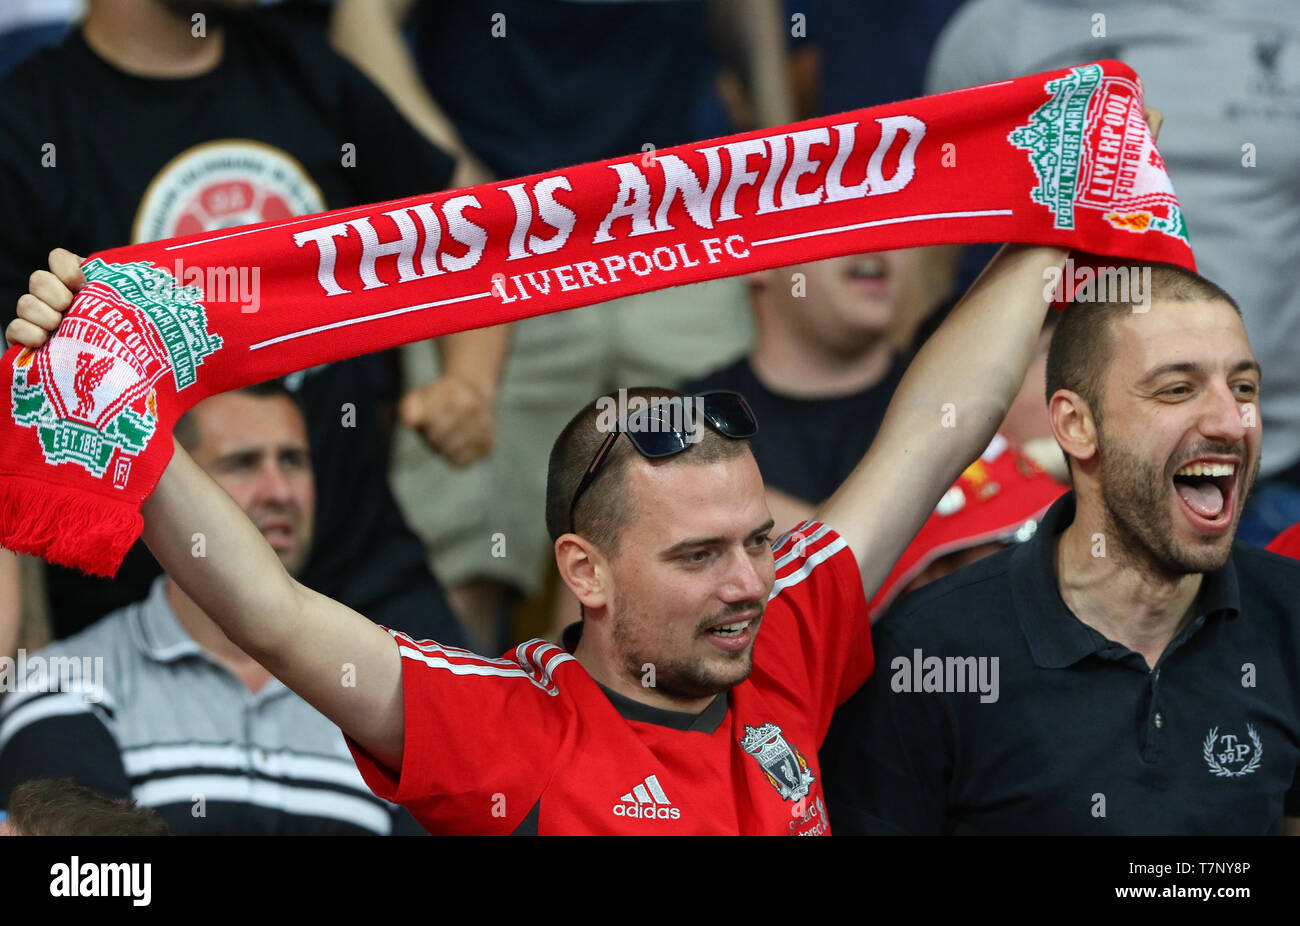 Liverpool supporter with This Is Anfield scarf shows his support during the UEFA Champions League Final 2018 game against Real Madrid Stock Photo